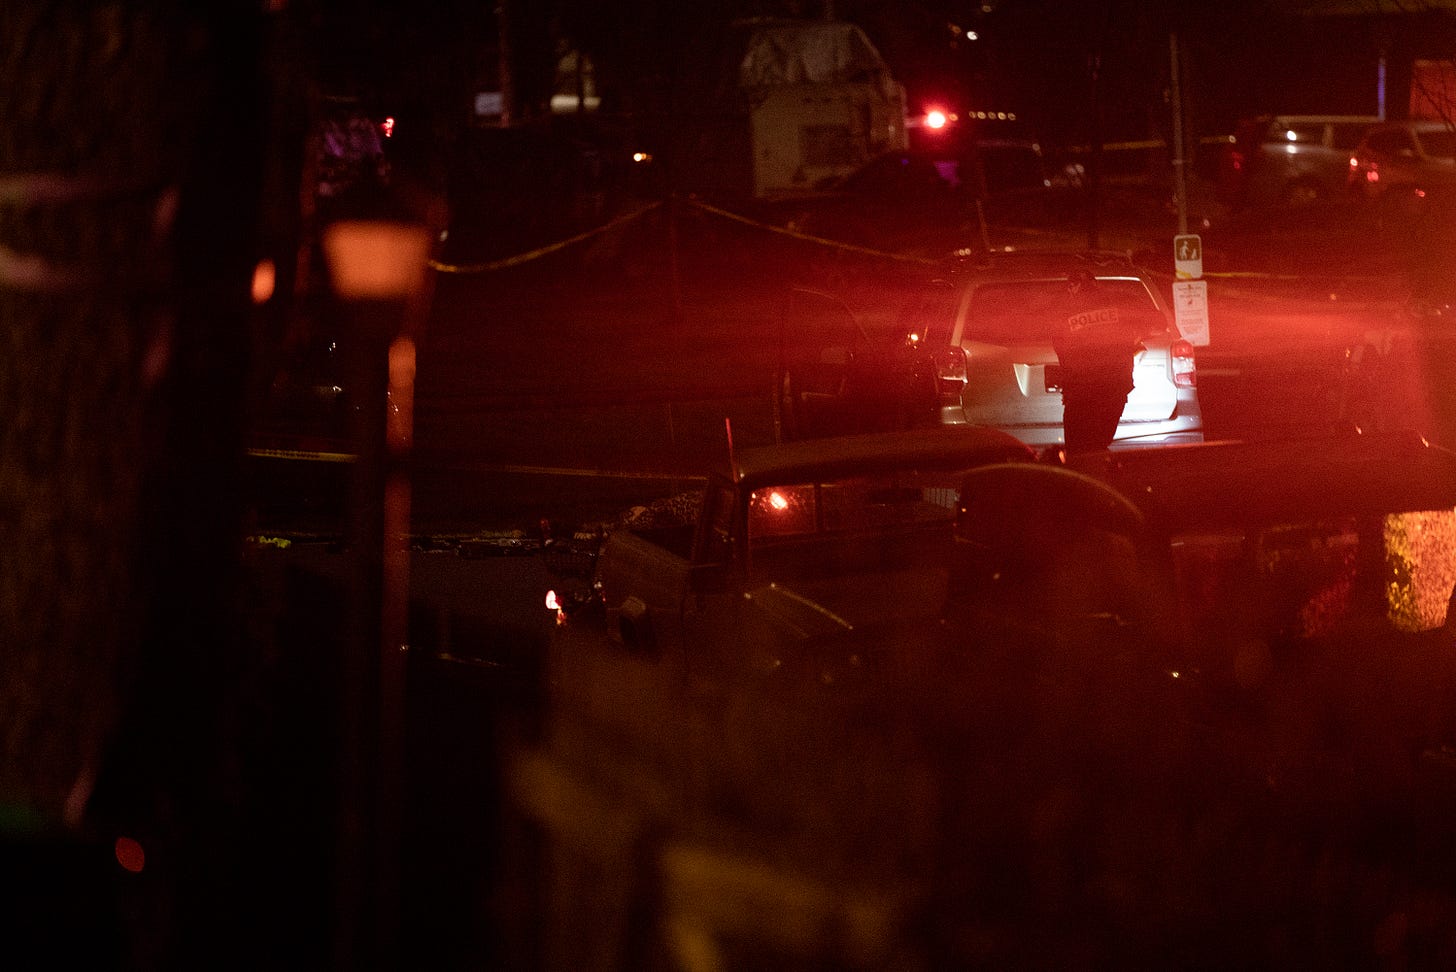 Portland police cordon off an area around a shooting on Saturday, Feb. 19, 2022. One person was killed and four injured after a neighbor reportedly confronted a group of protesters near Normandale Park in Northeast Portland.